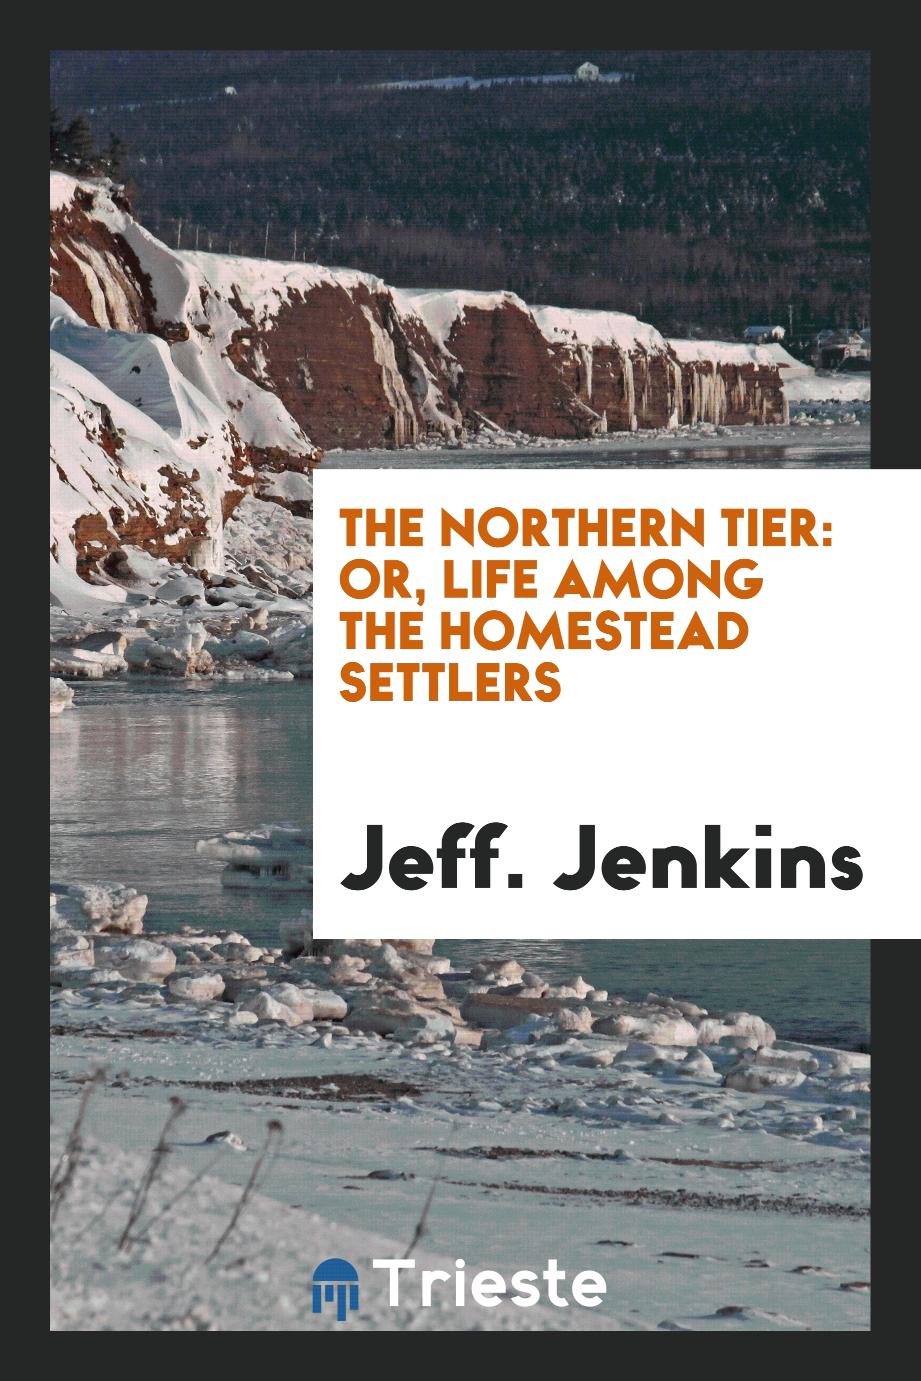 The northern tier: or, Life among the homestead settlers